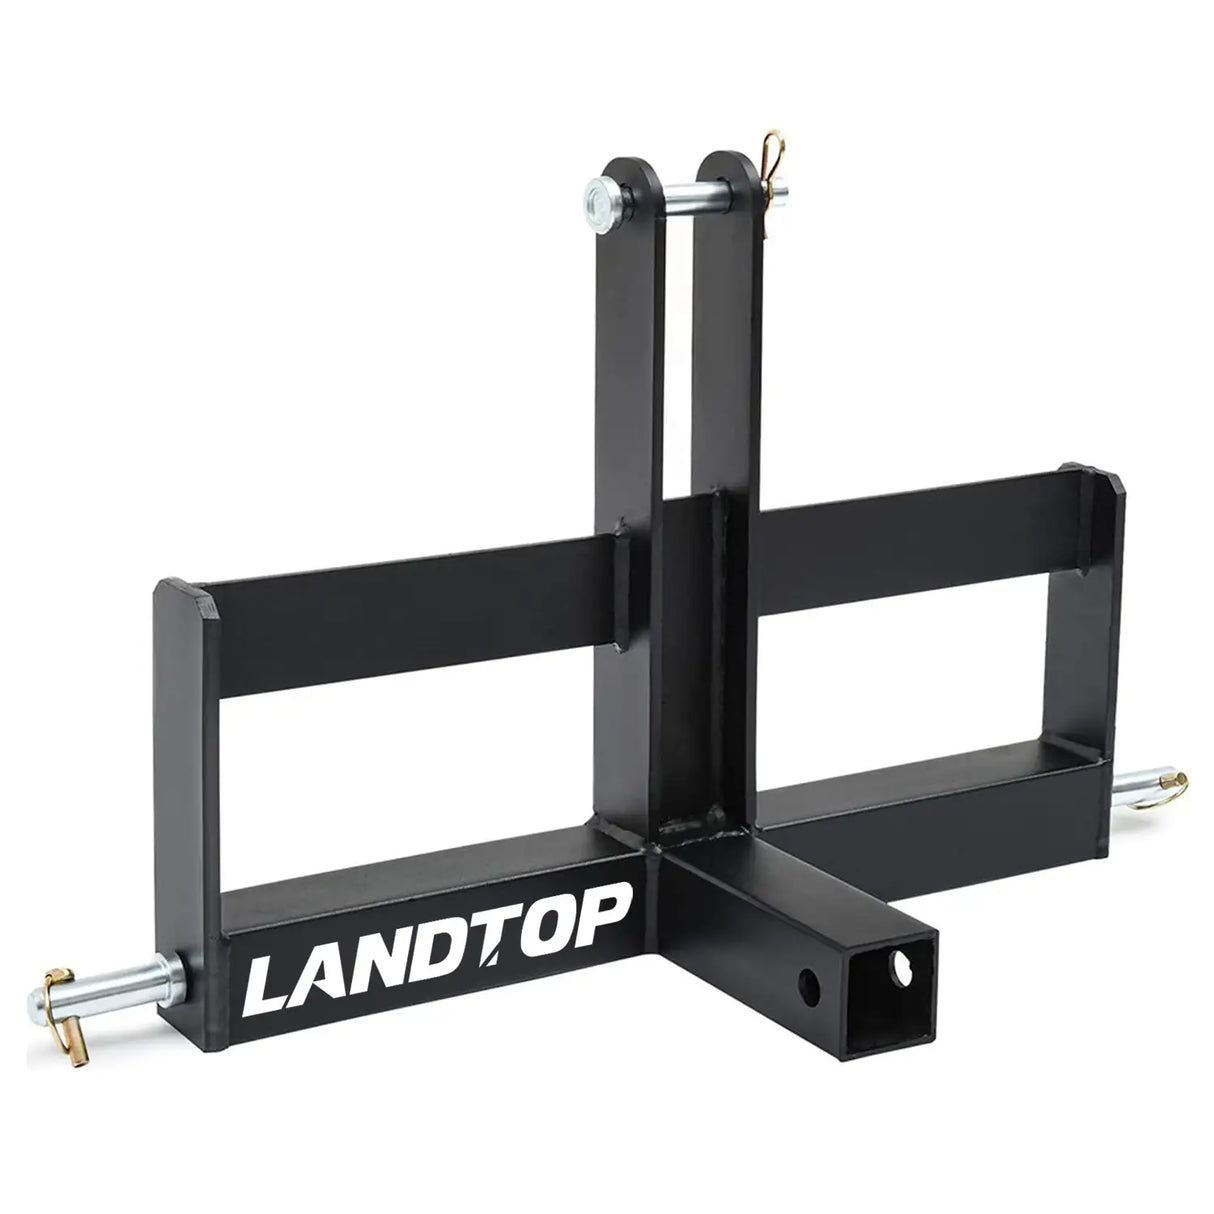 3 Point Hitch Receiver for Category 1, 2" Receiver Tractor Drawbar Attachments with Suitcase Weight Brackets, Black